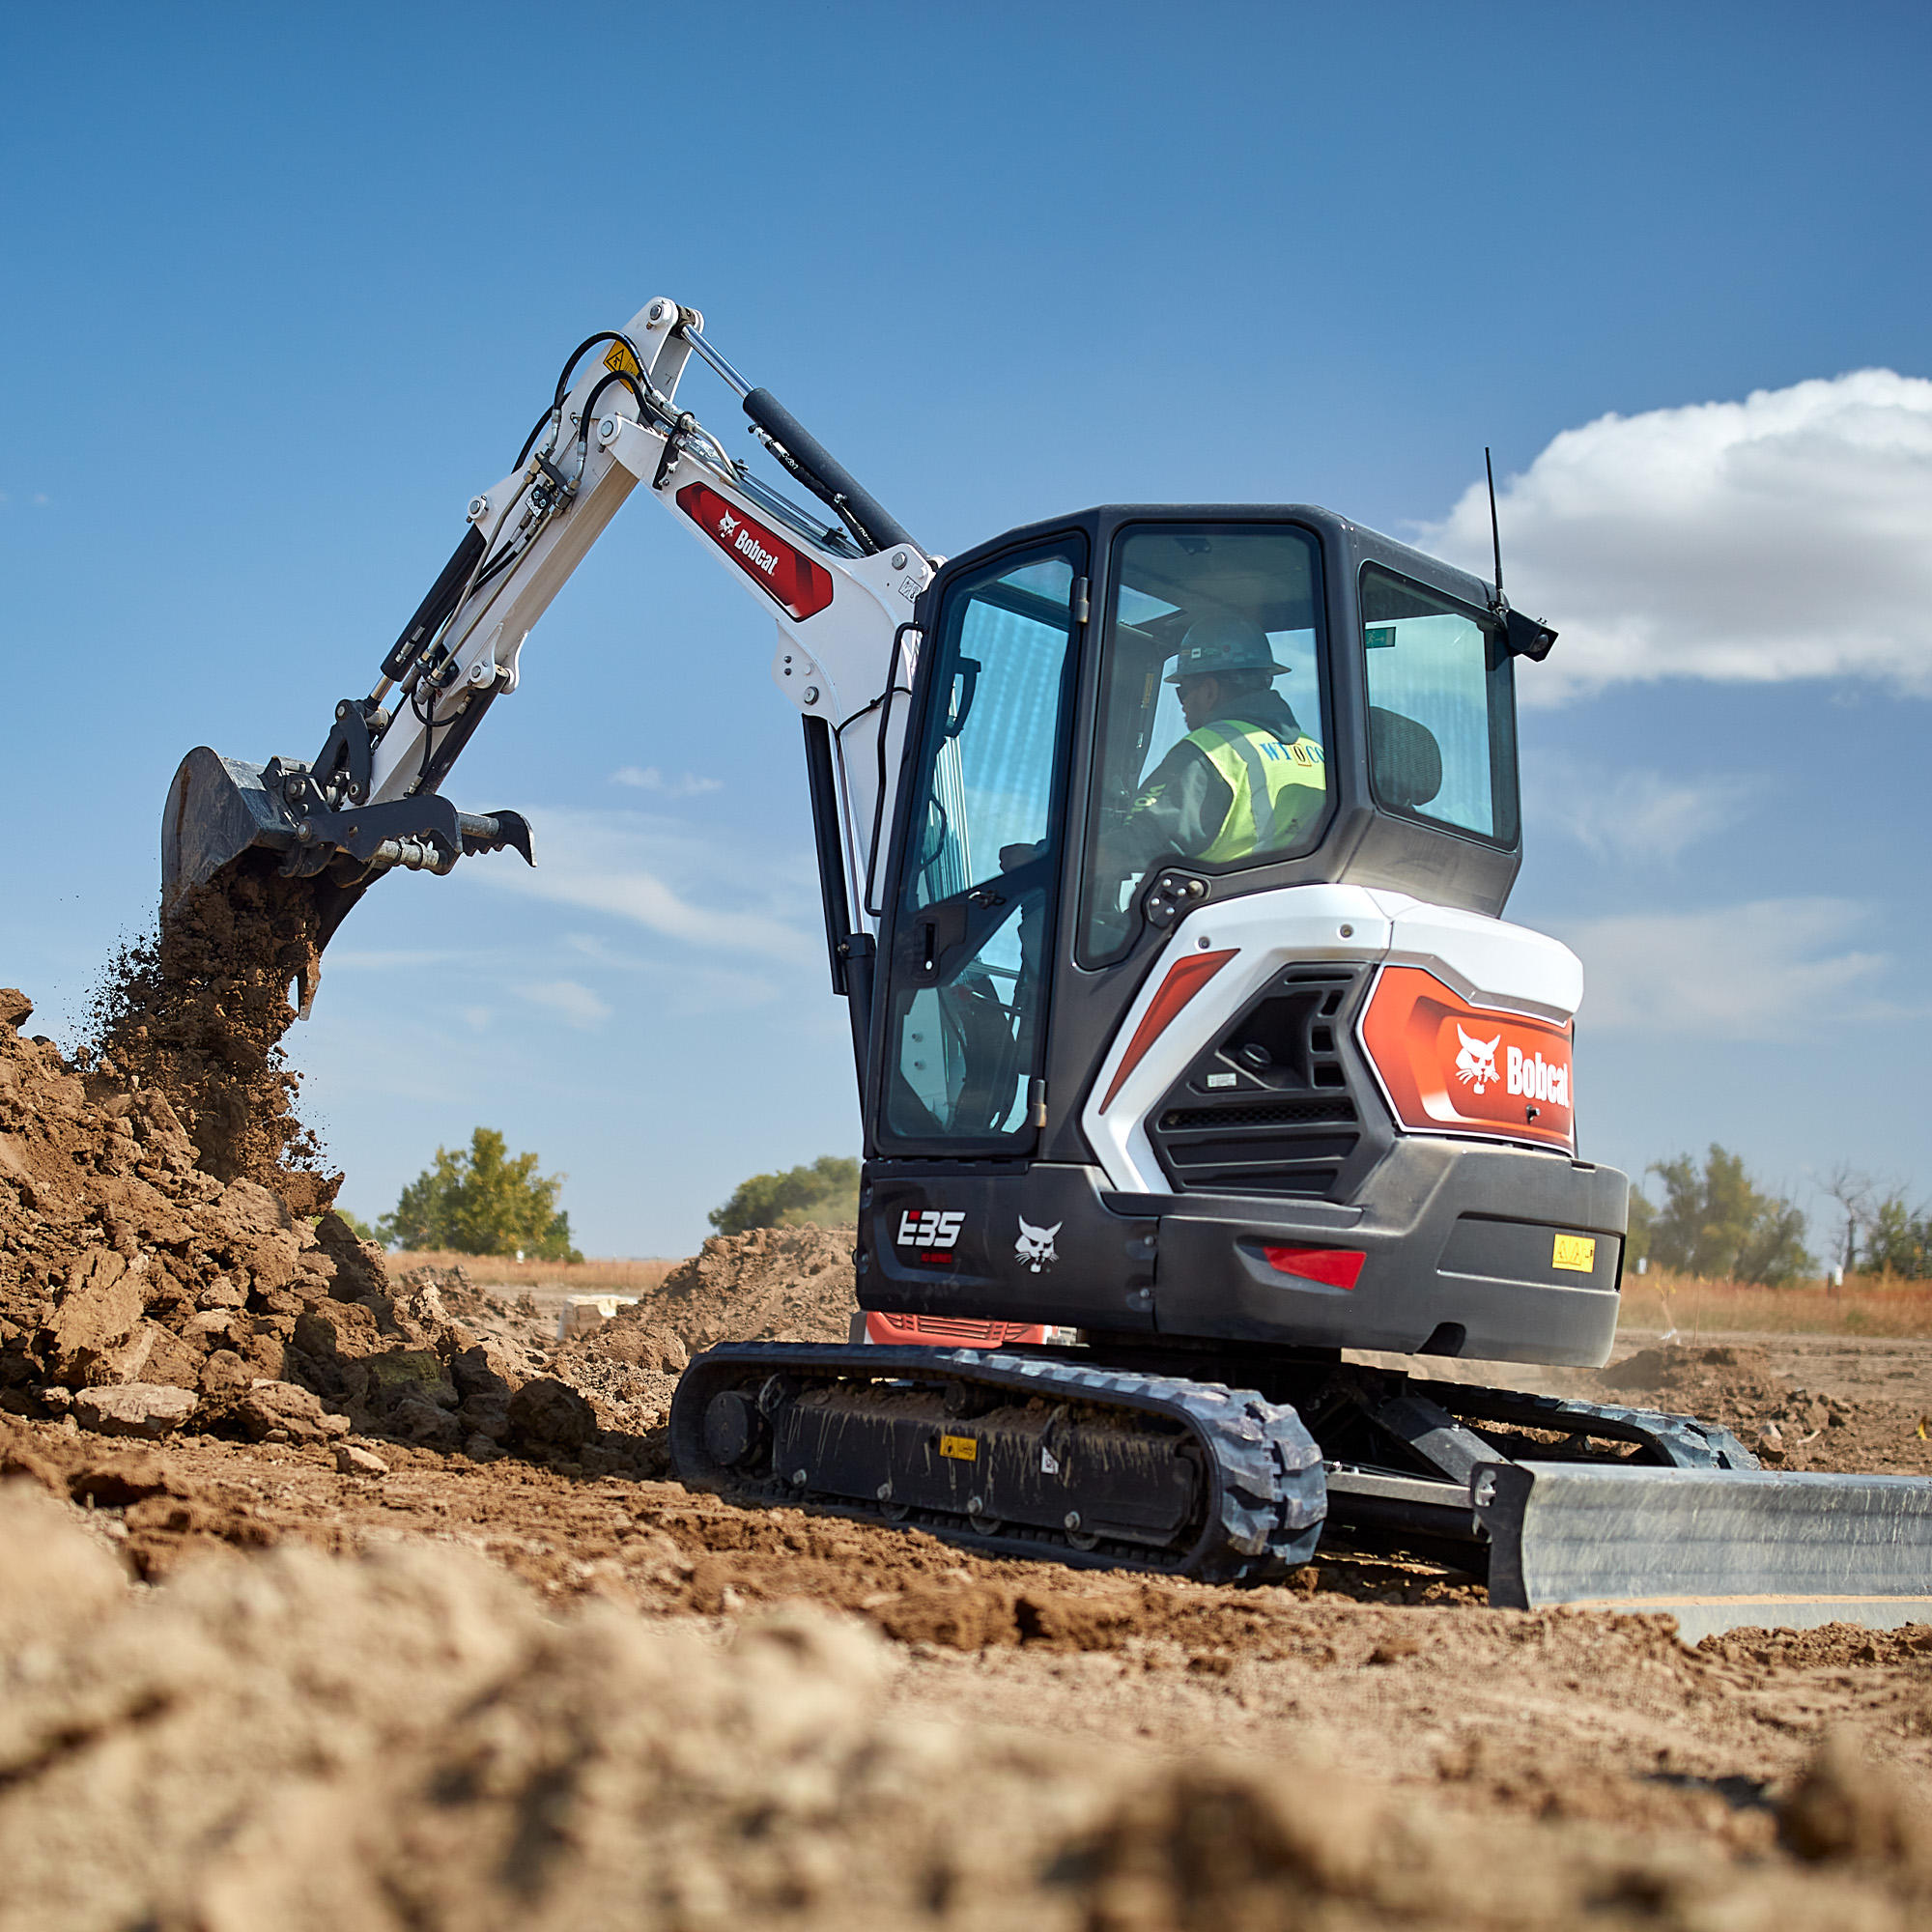 Bobcat E35 compact excavator with clamp and bucket